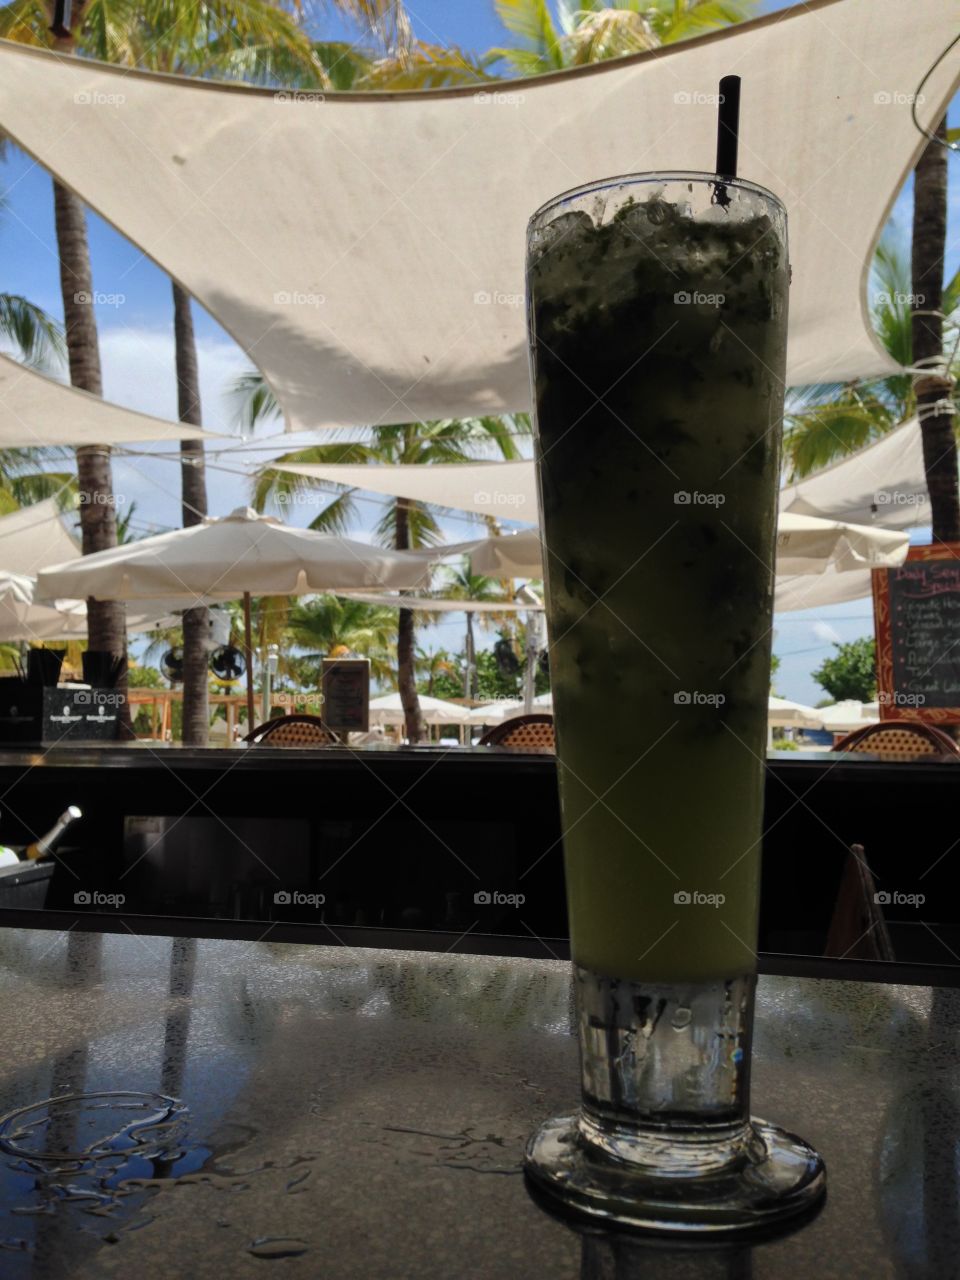 Mojito a day keeps the doctor away , having a drink at Nikki beach club , Miami Florida 